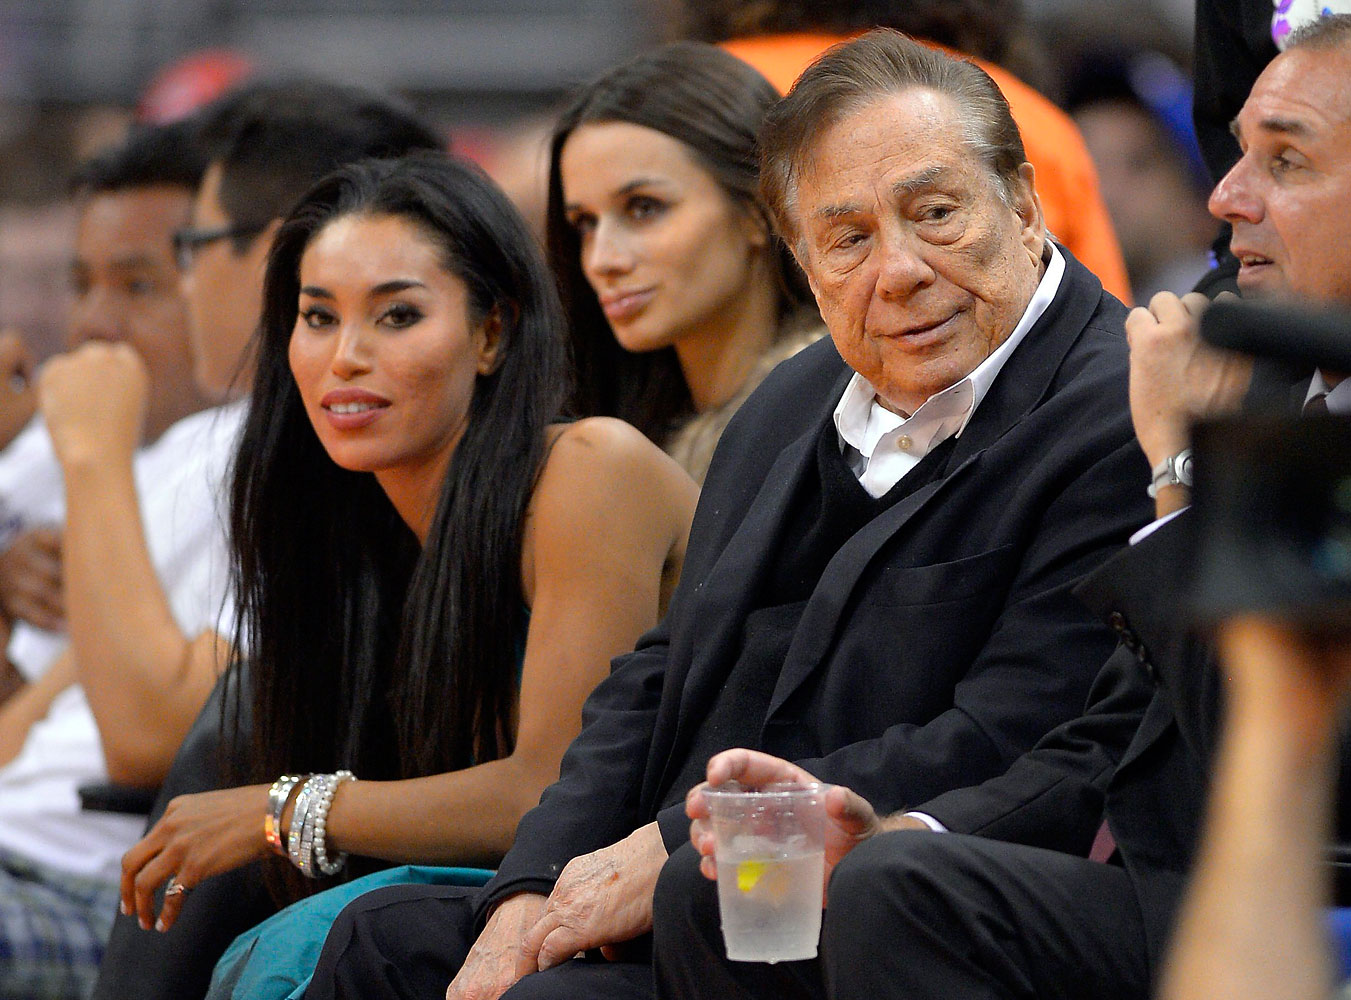 Los Angeles Clippers owner Donald Sterling and V. Stiviano watch the Clippers play the Sacramento Kings during an NBA game in Los Angeles on Oct. 25, 2013 (Mark J. Terrill—AP)